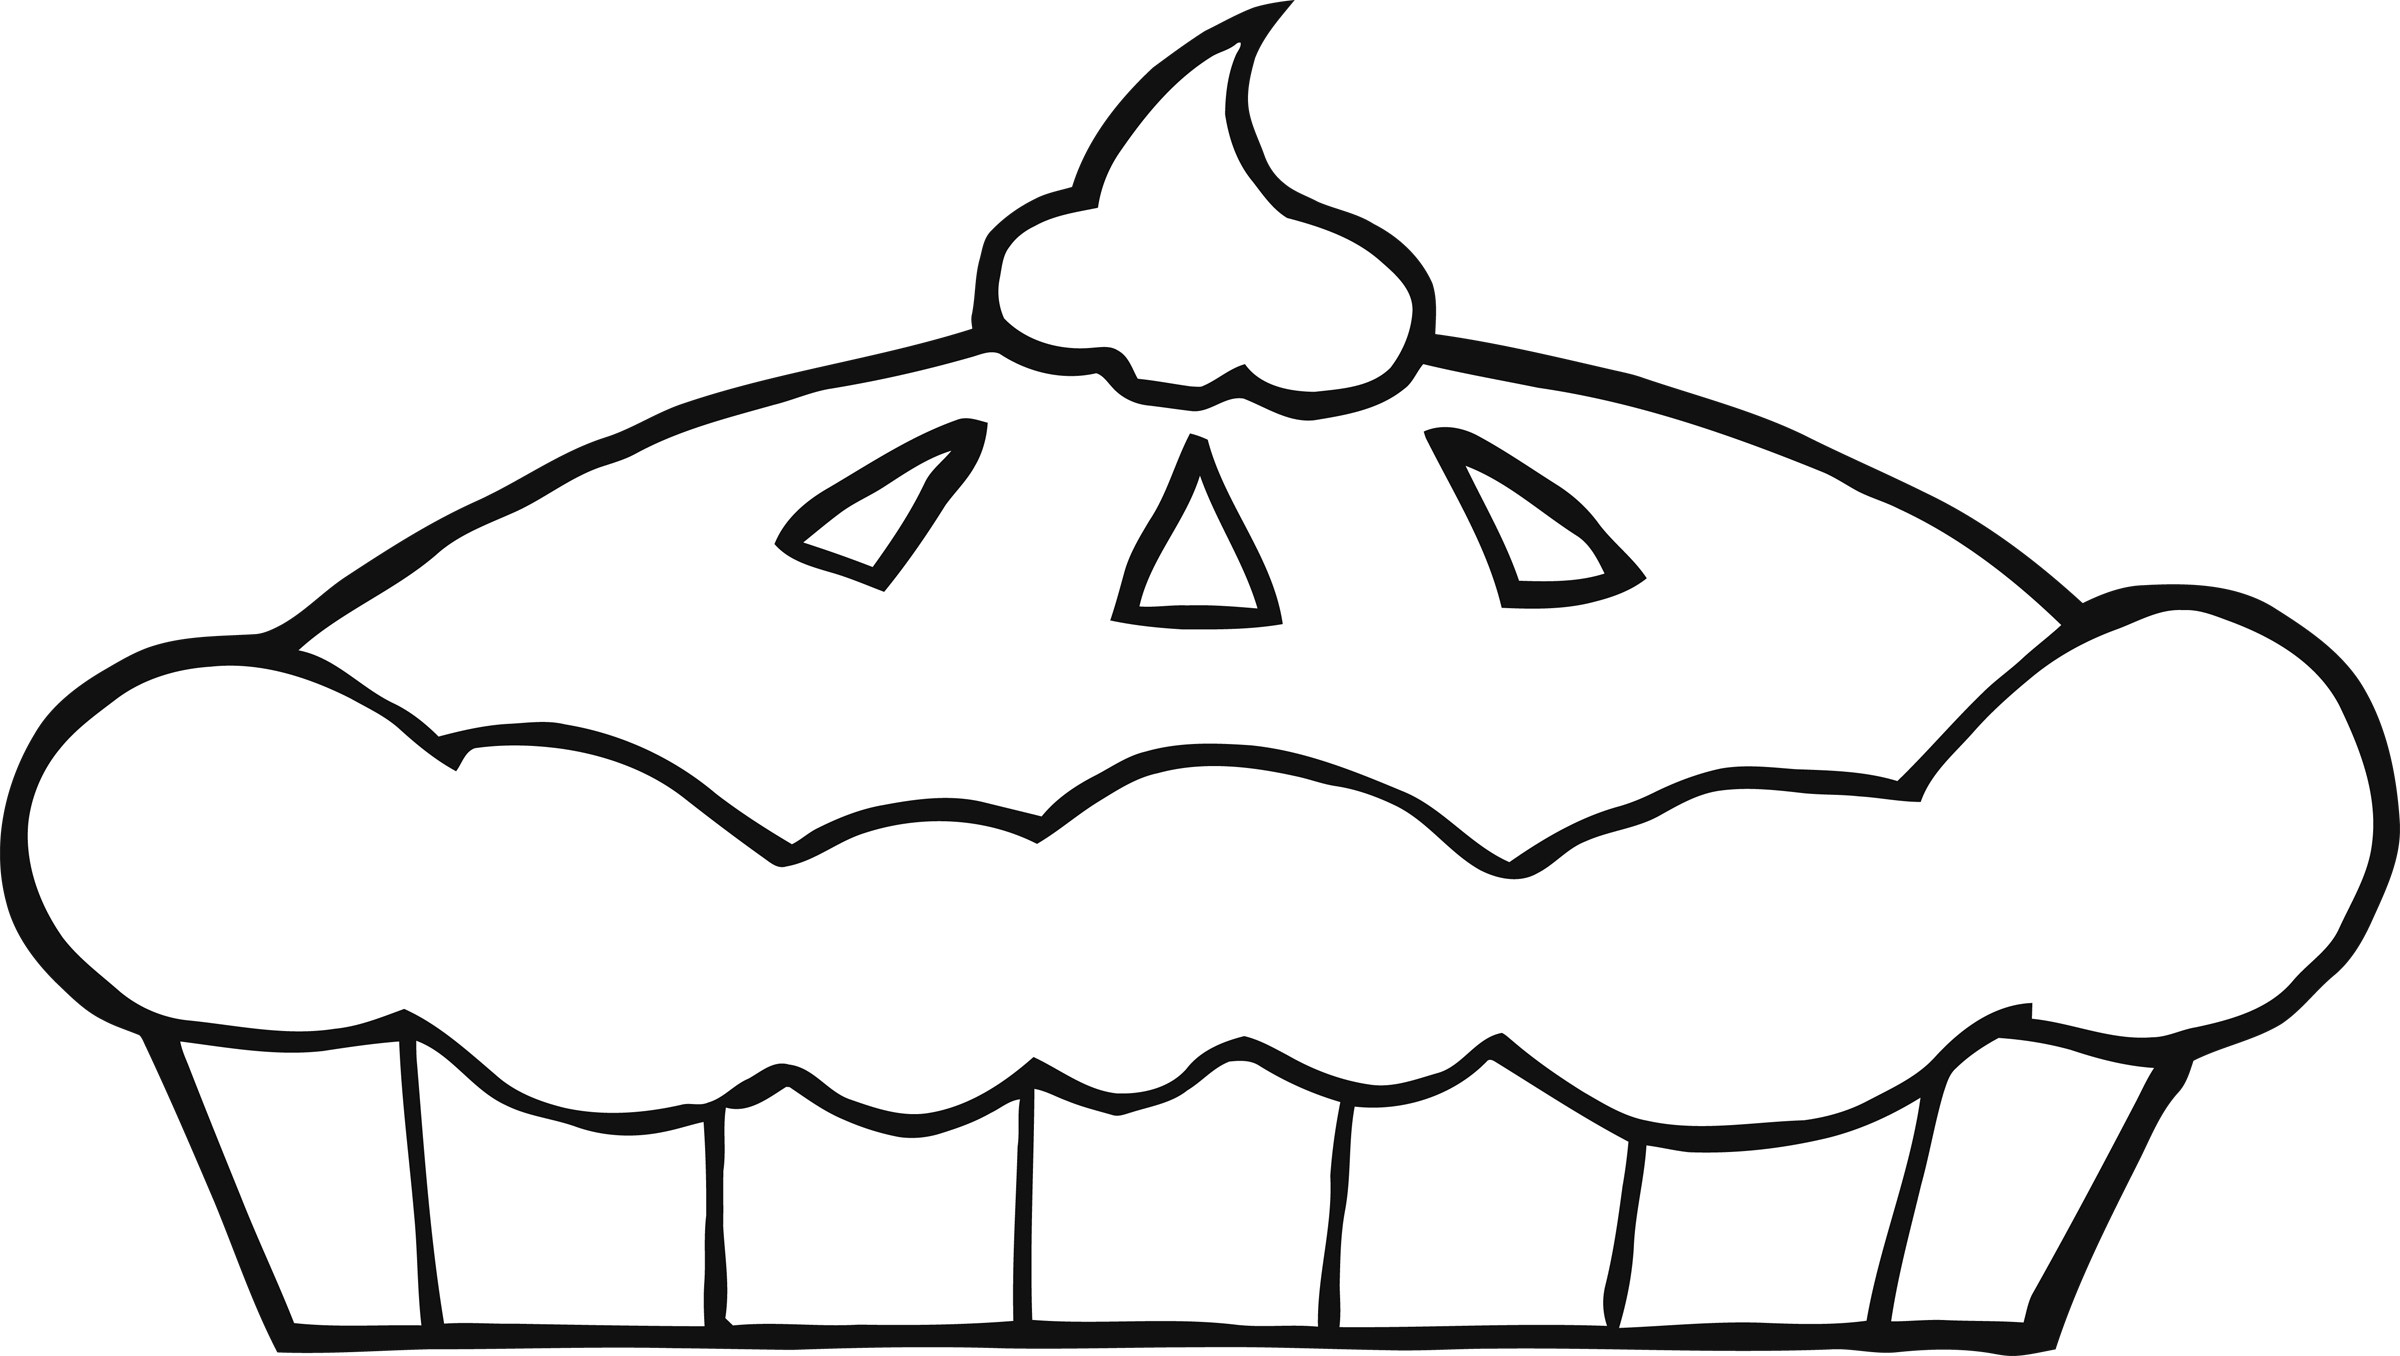 Pie Clipart Black And White | Clipart library - Free Clipart Images